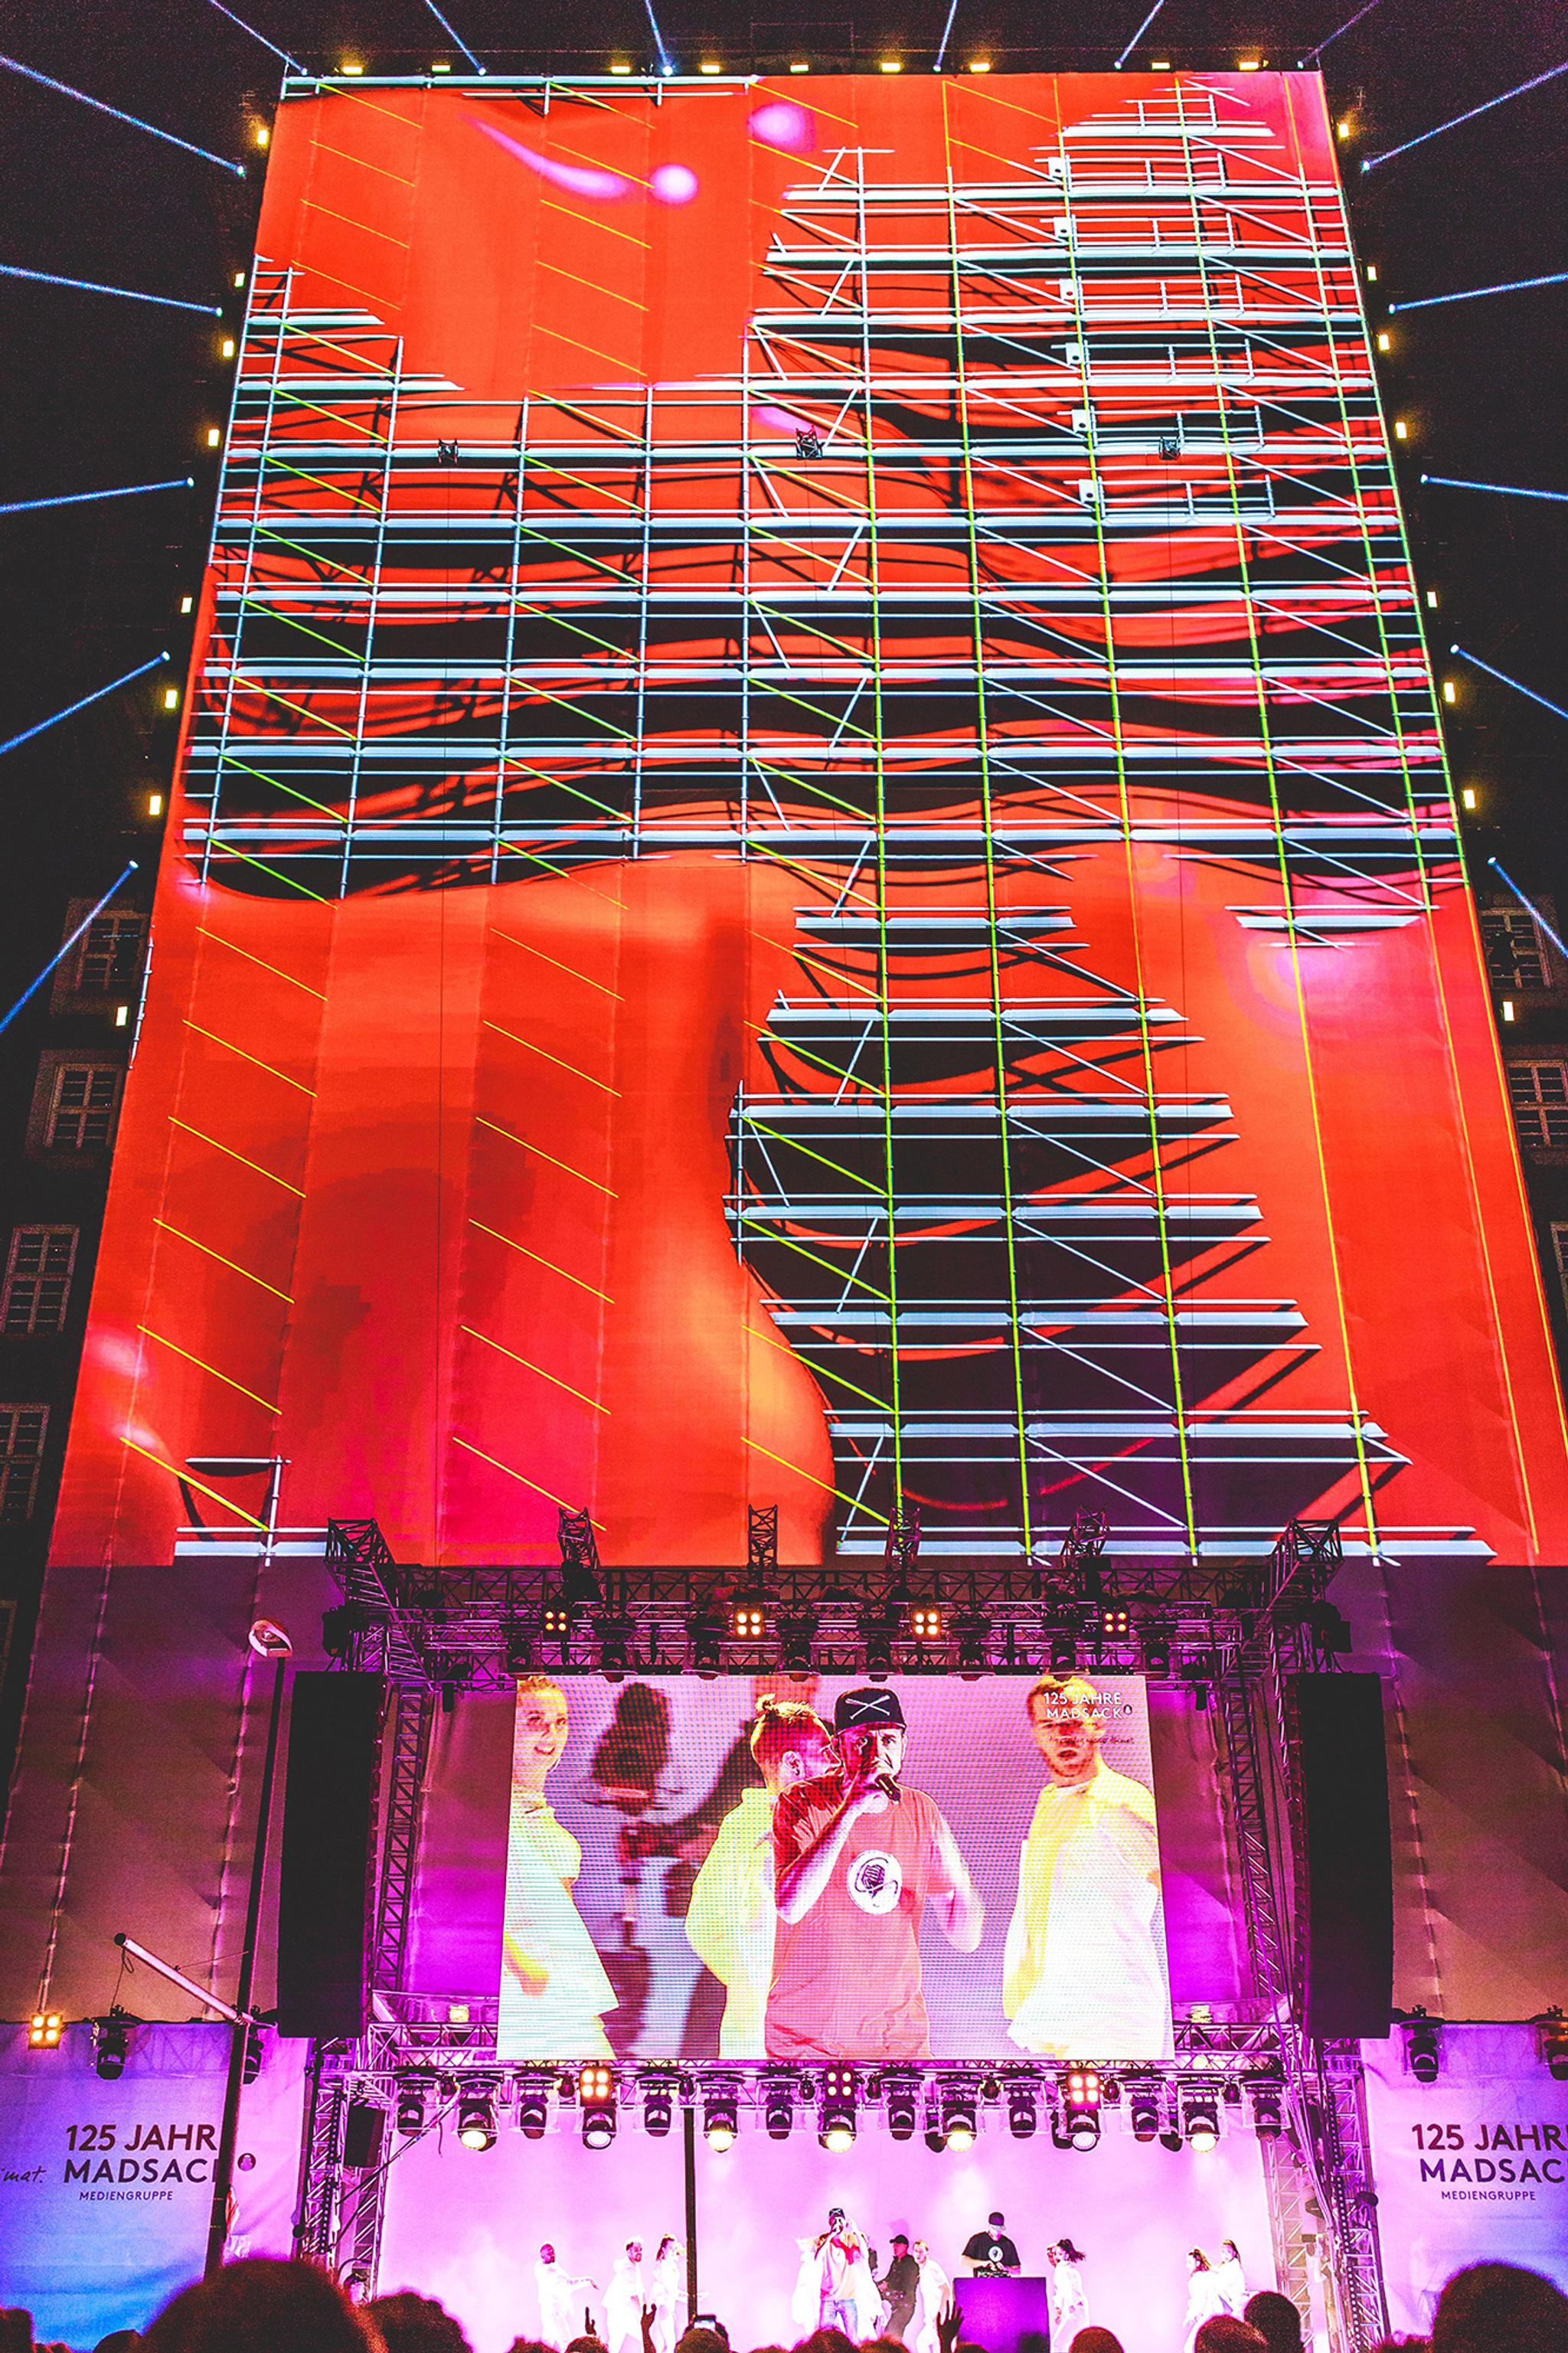 Video mapping of red splotches overlayed on a scaffolding pattern on a large vertical stage. A large crowd watches outdoors.